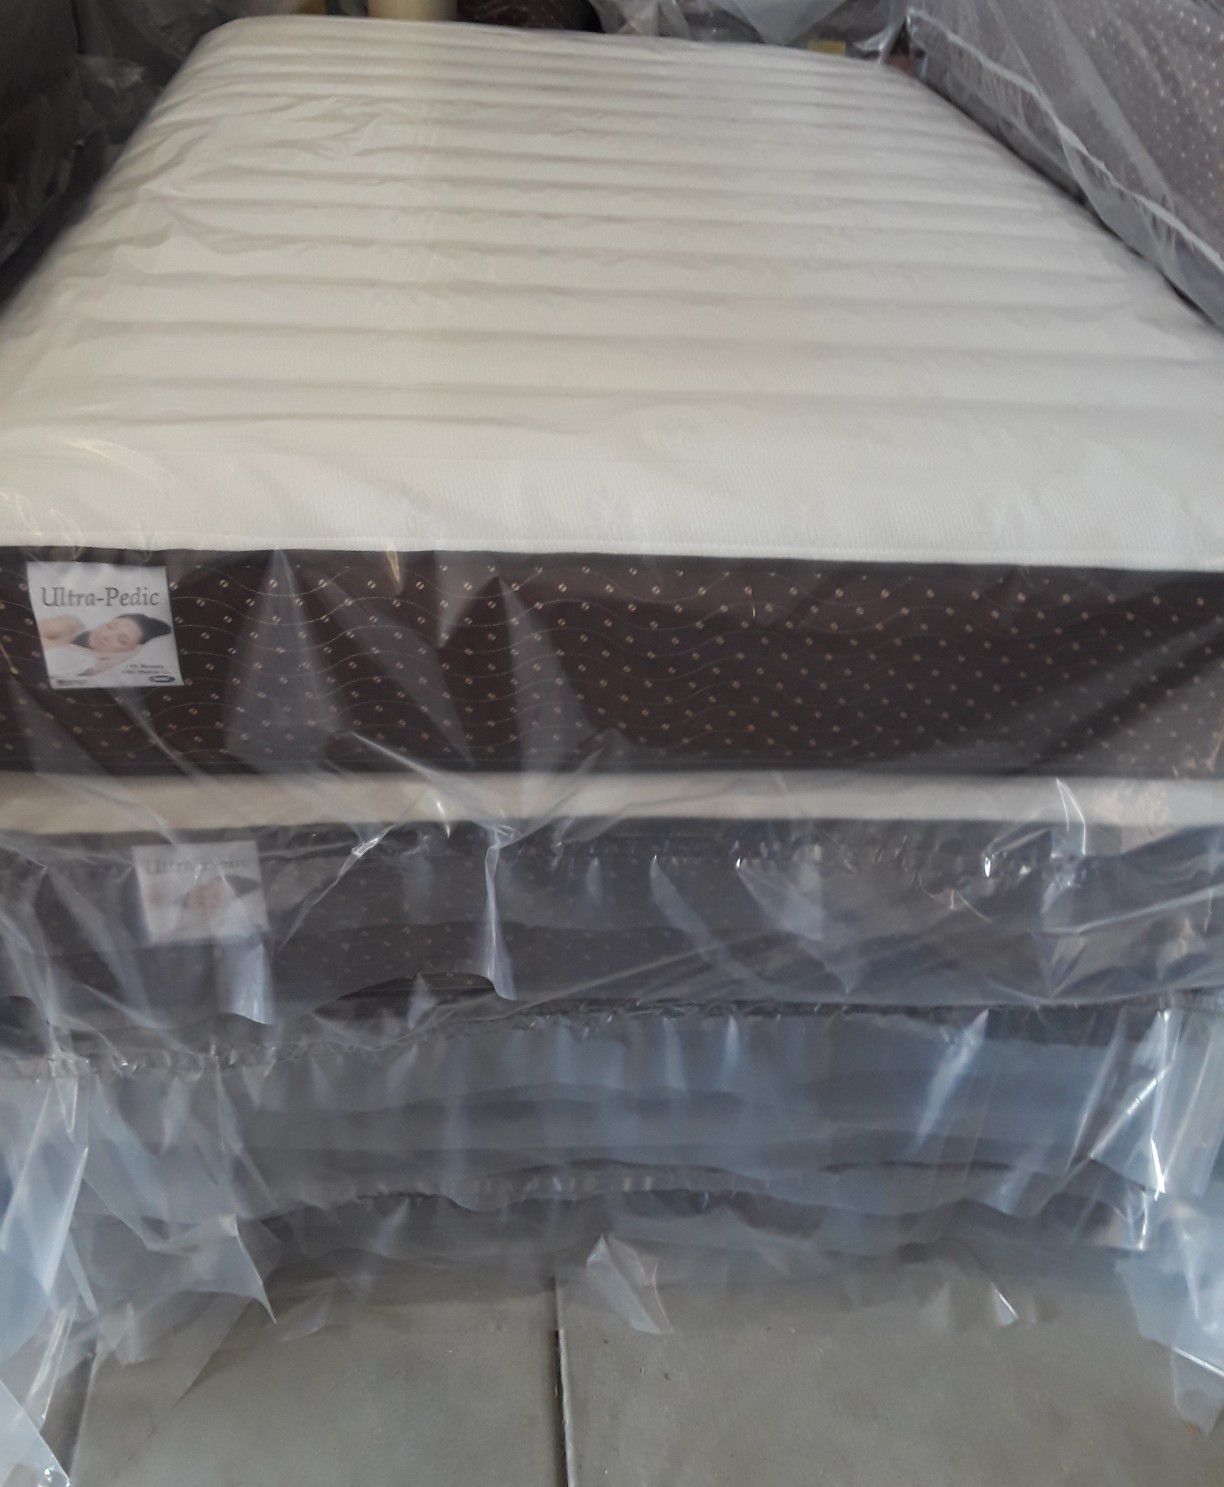 Queen sz pillow top Mattress its a very soft"with factory warranty,new in plastic. YOU'LL SLEEP LIKE A BABY $210.00.